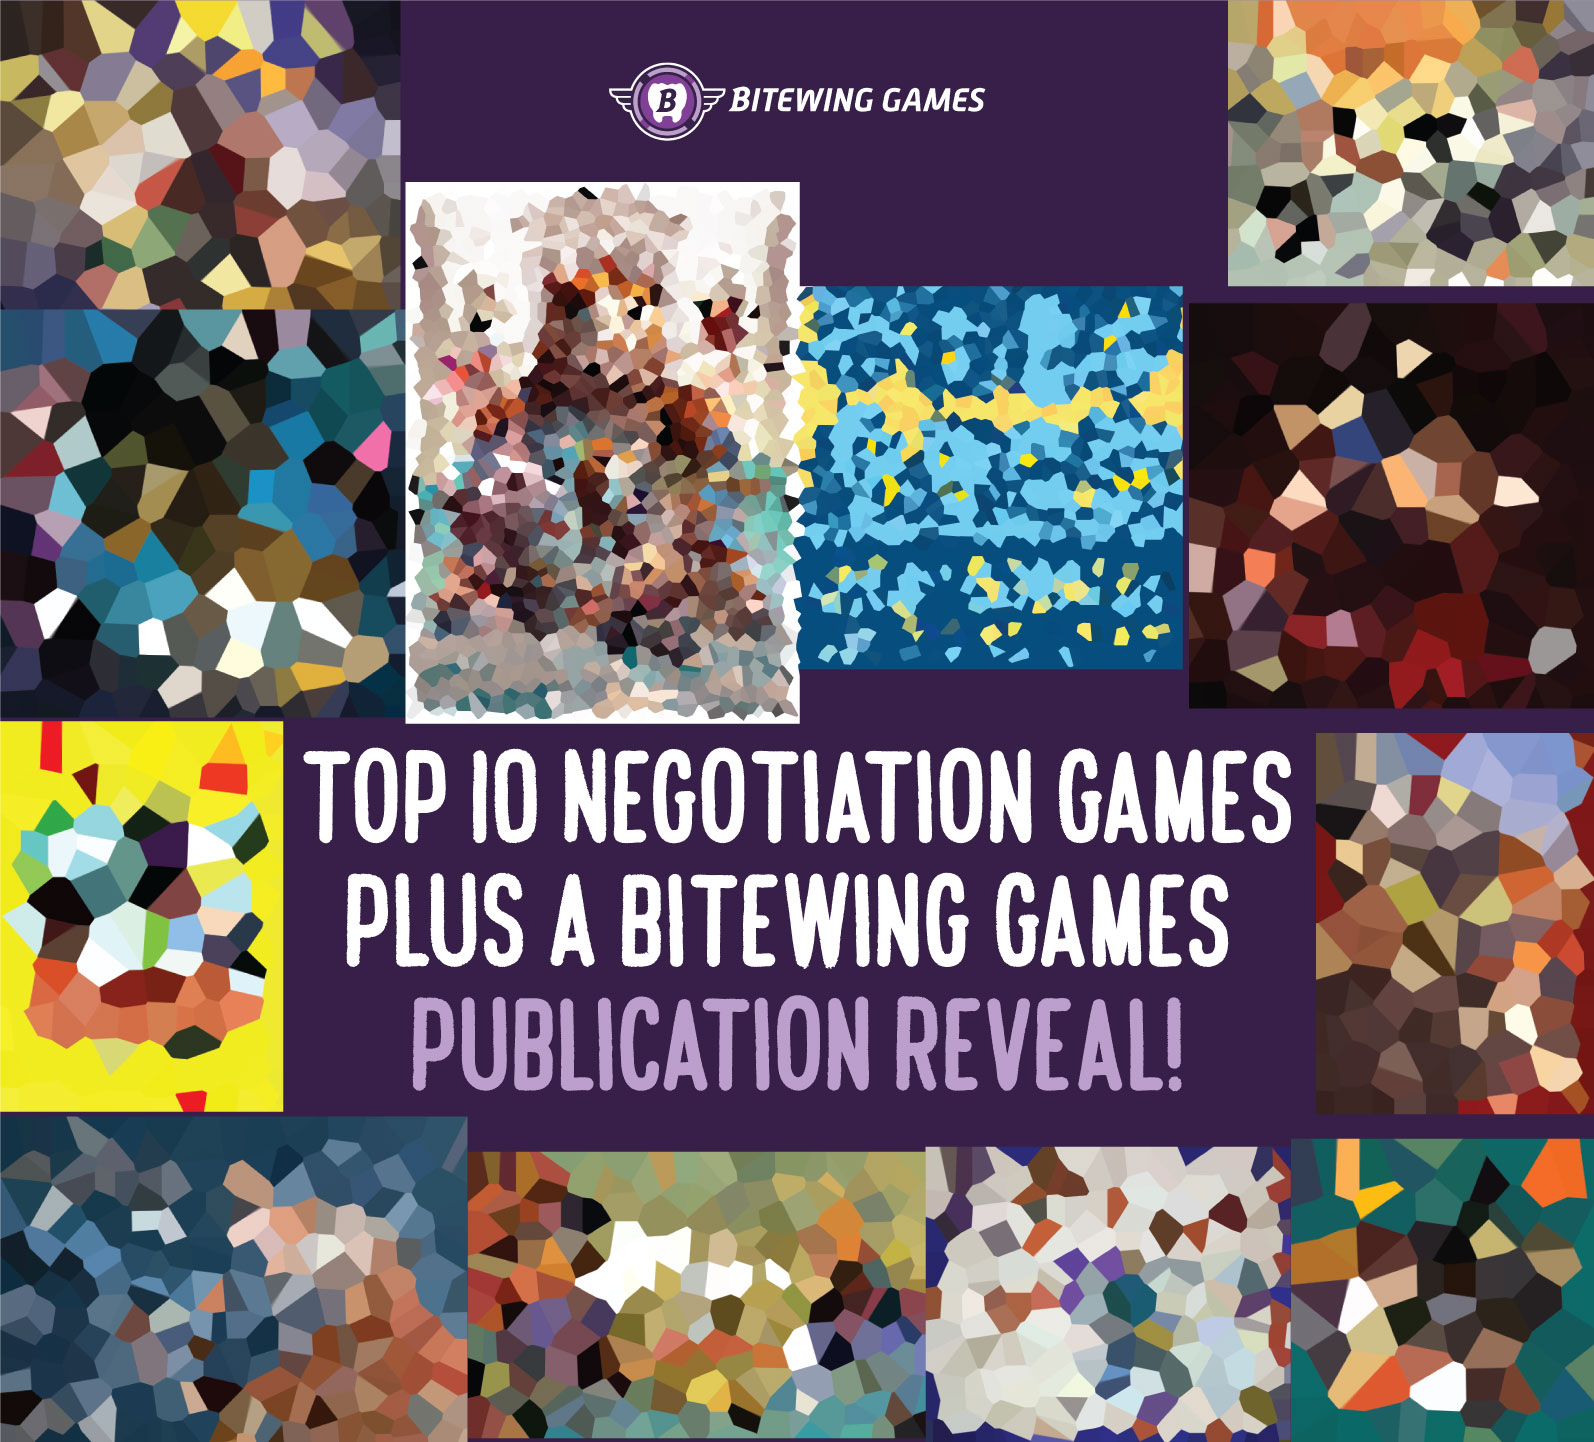 Top 10 Negotiation Board Games + A Bitewing Games Publication Reveal!